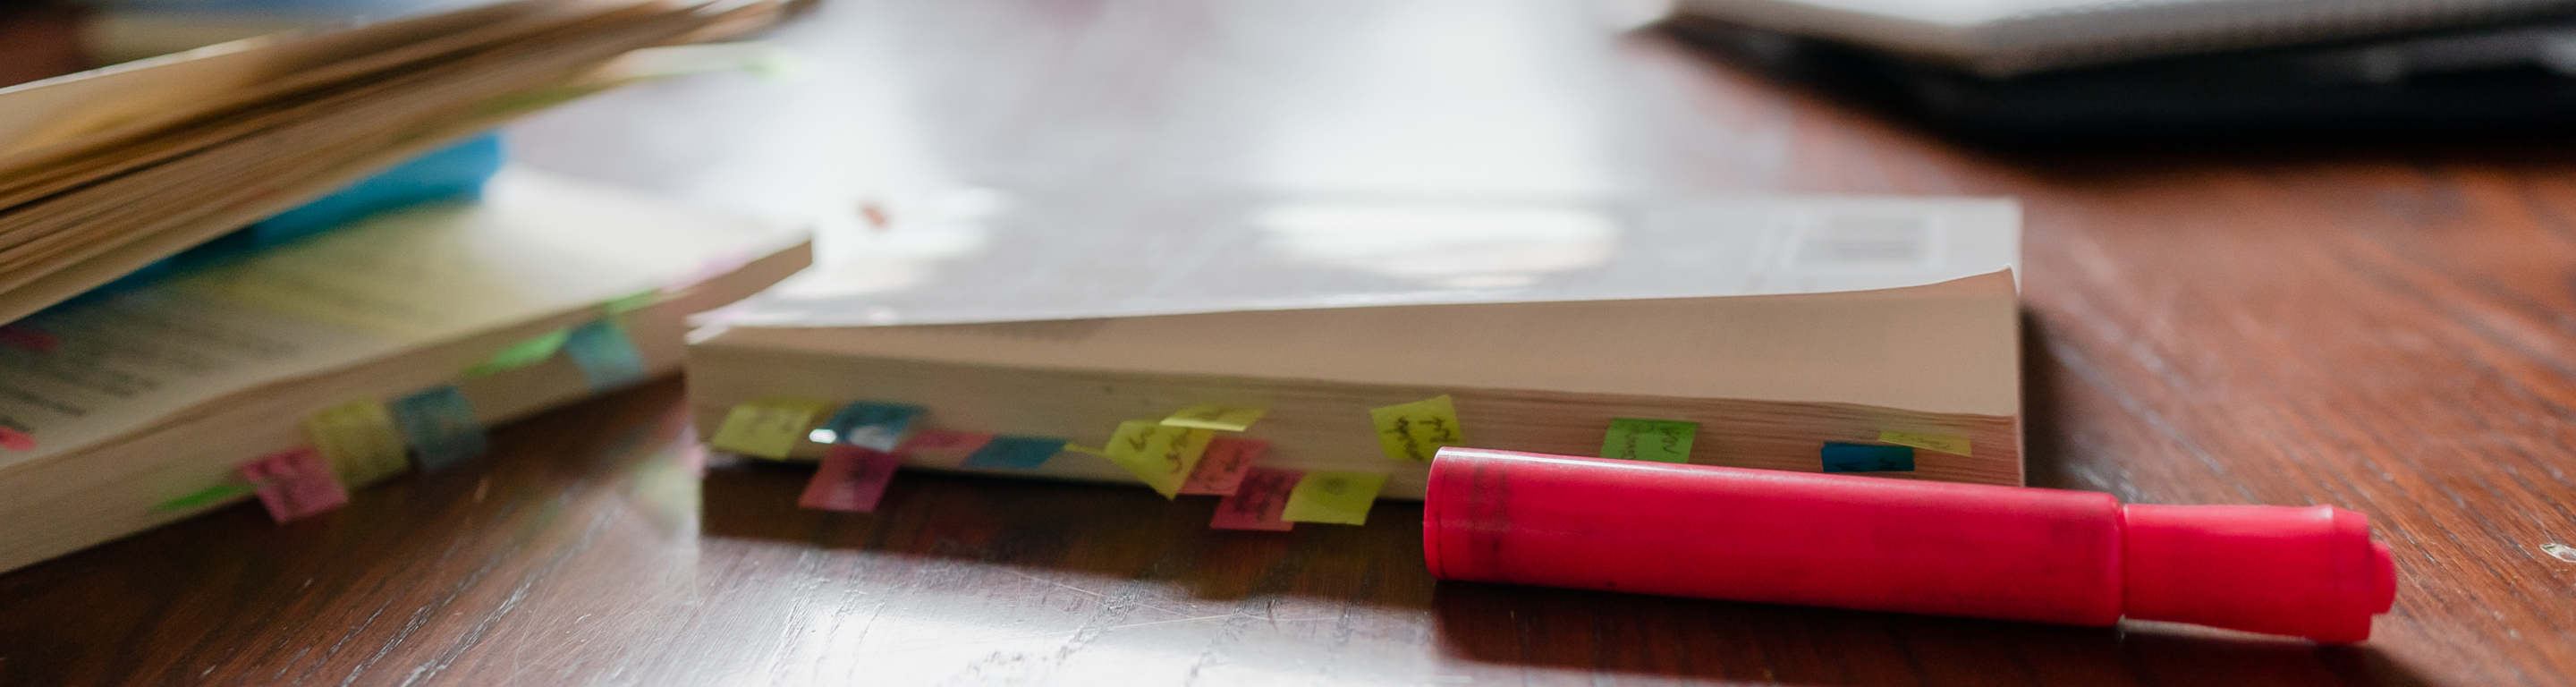 A closeup of a wooden table with a highlighter and multiple books.